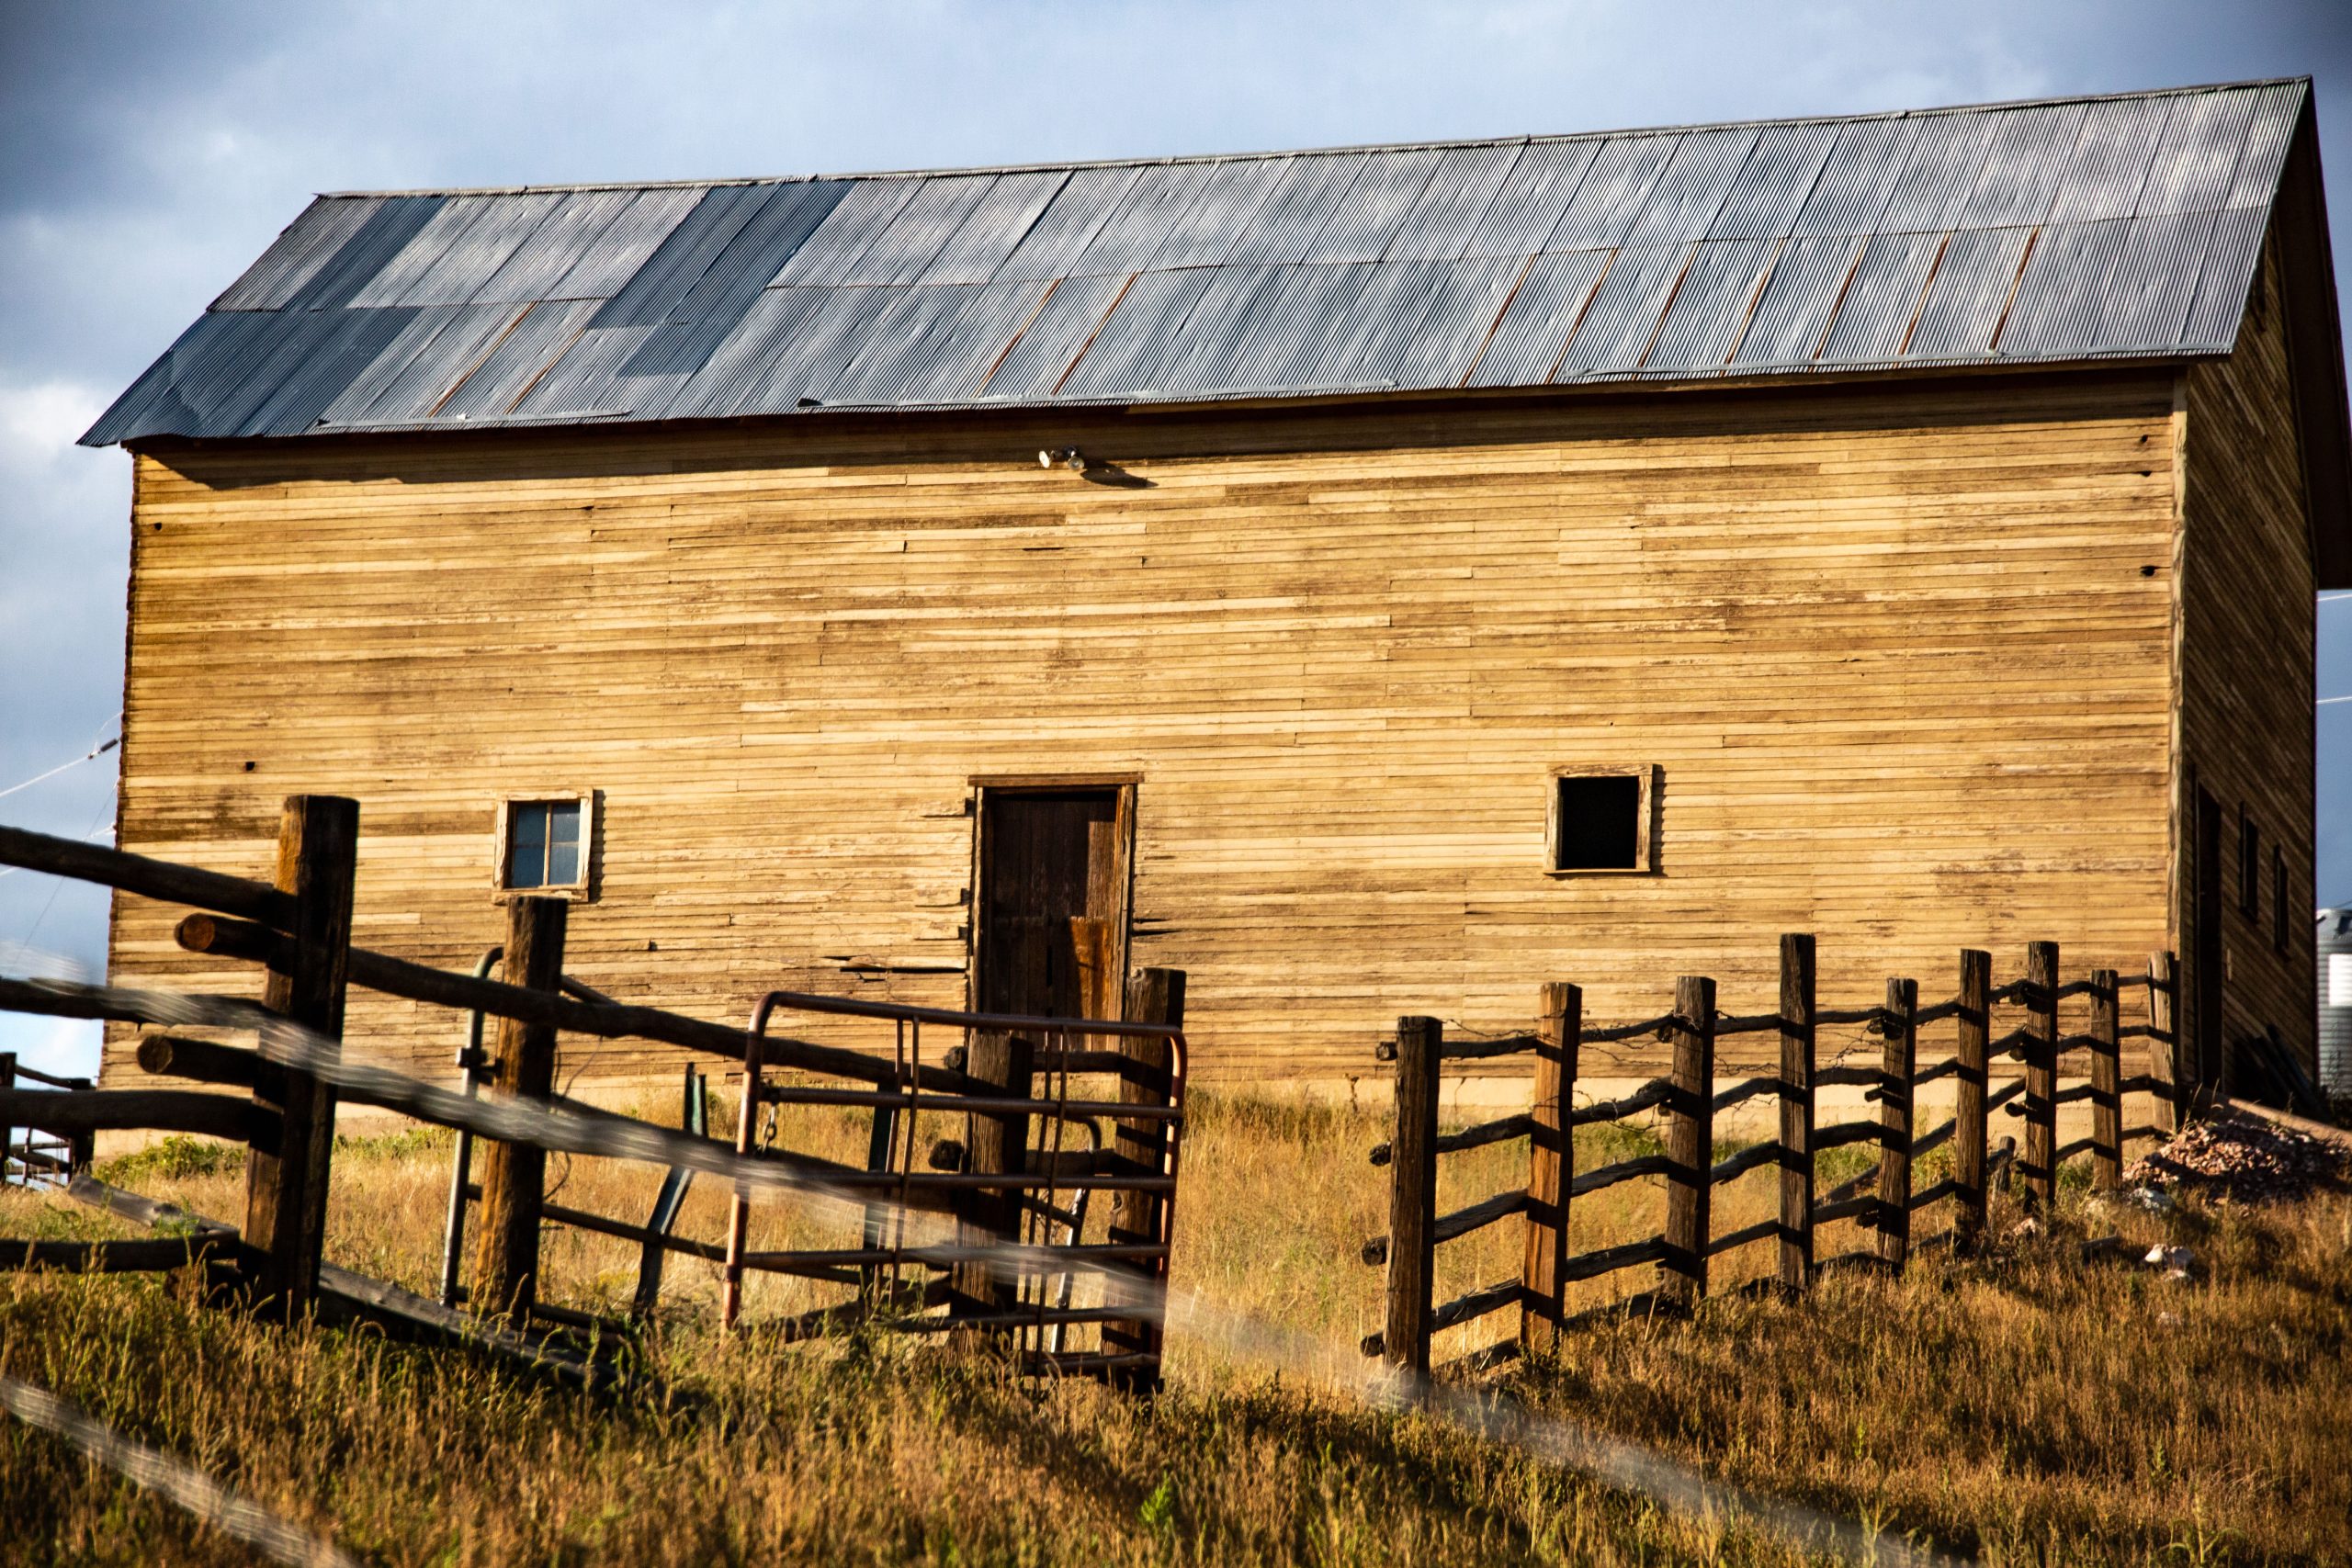 Image 1: Historic horse barn at red mountain open space.